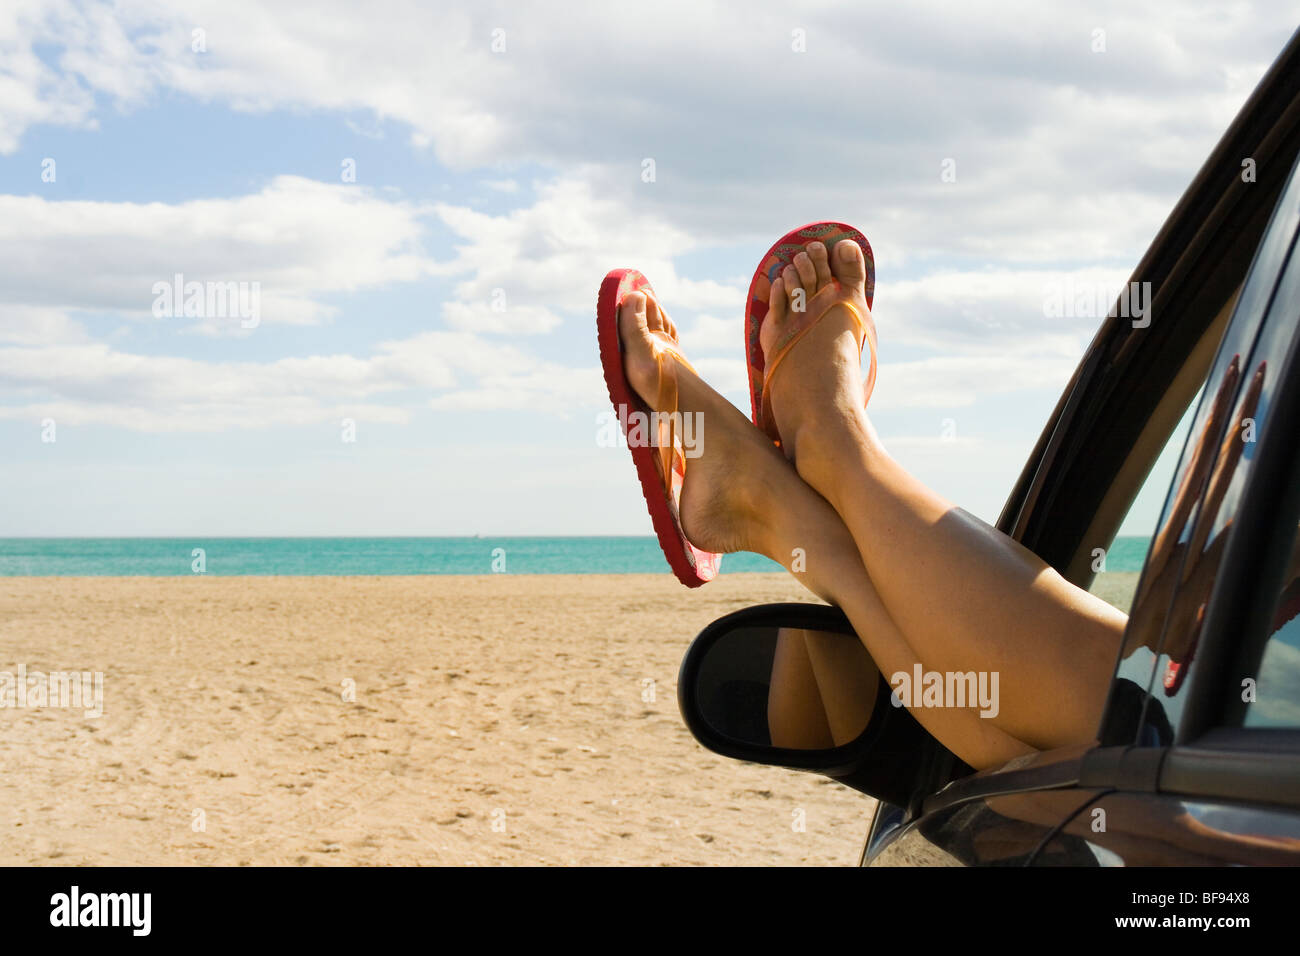 Woman's legs and feet in orange flip flops sticking out of car window in front of empty beach Stock Photo